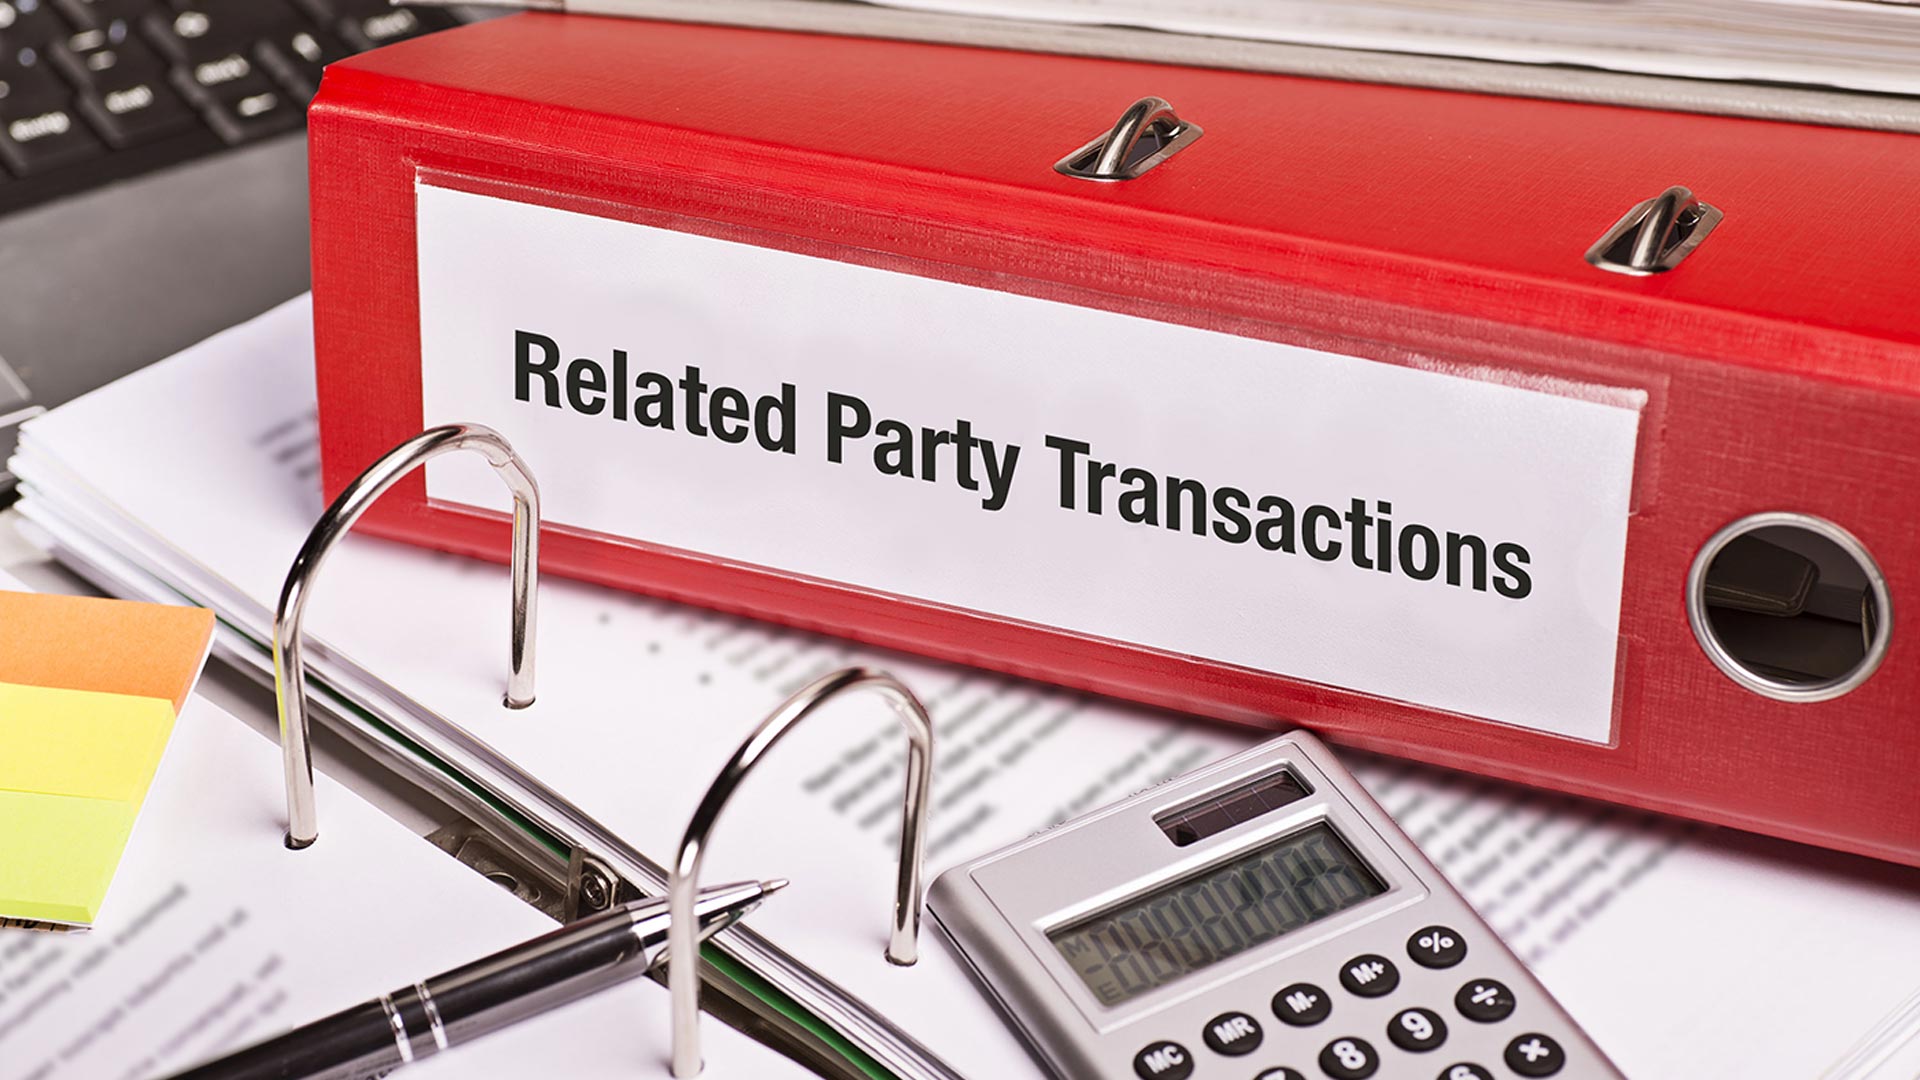 Mukand Ltd | Download Related Party Transaction Reports